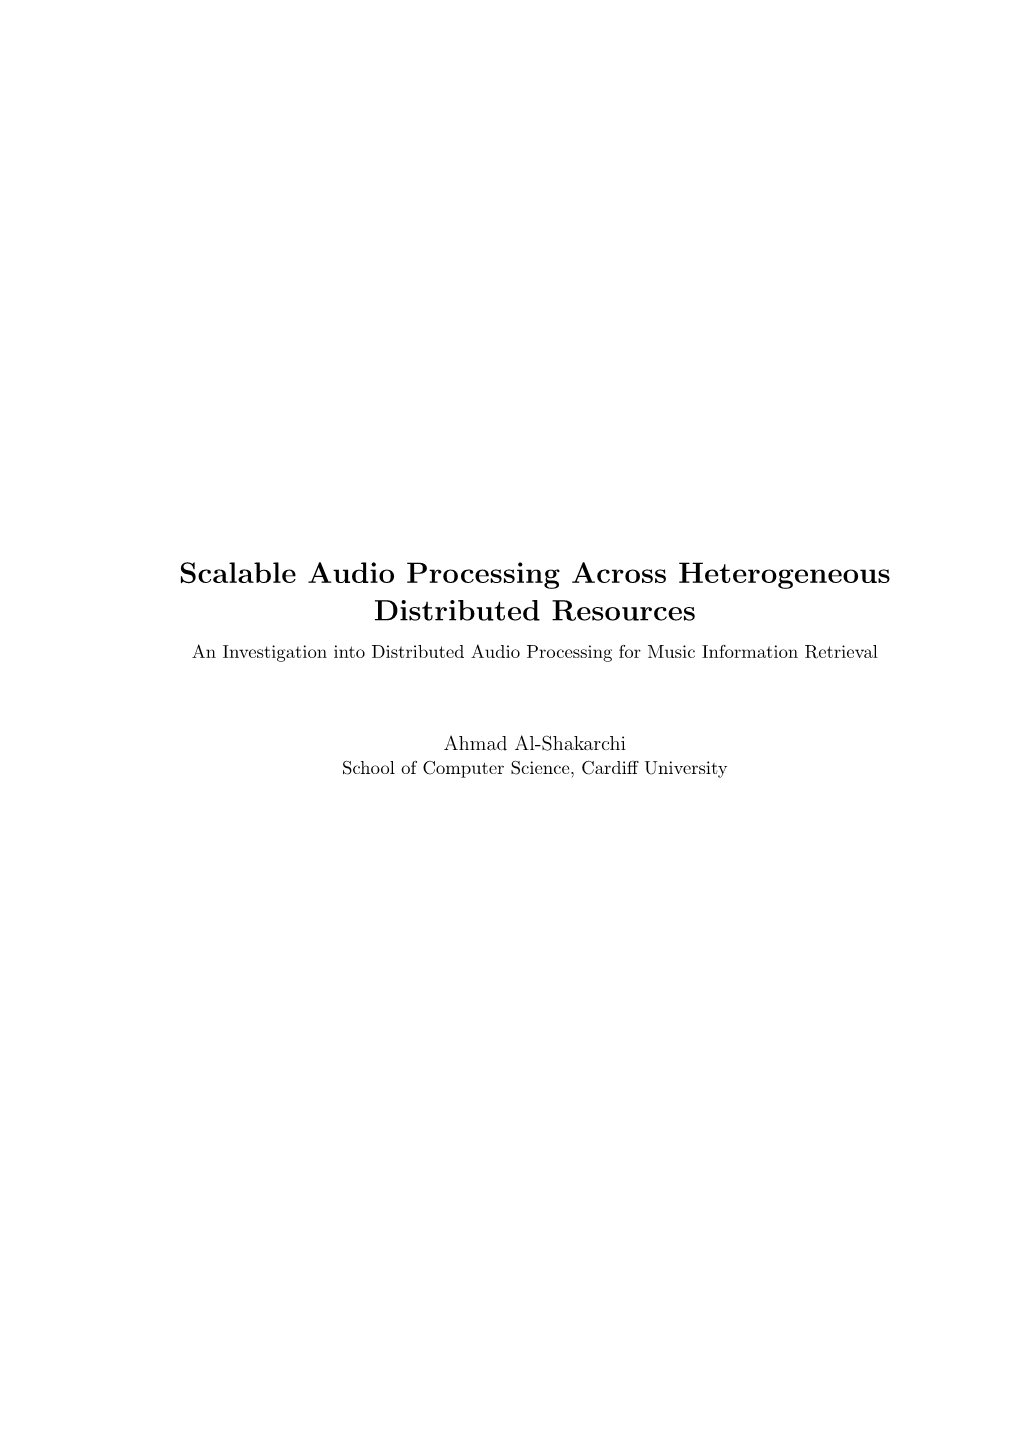 Scalable Audio Processing Across Heterogeneous Distributed Resources an Investigation Into Distributed Audio Processing for Music Information Retrieval